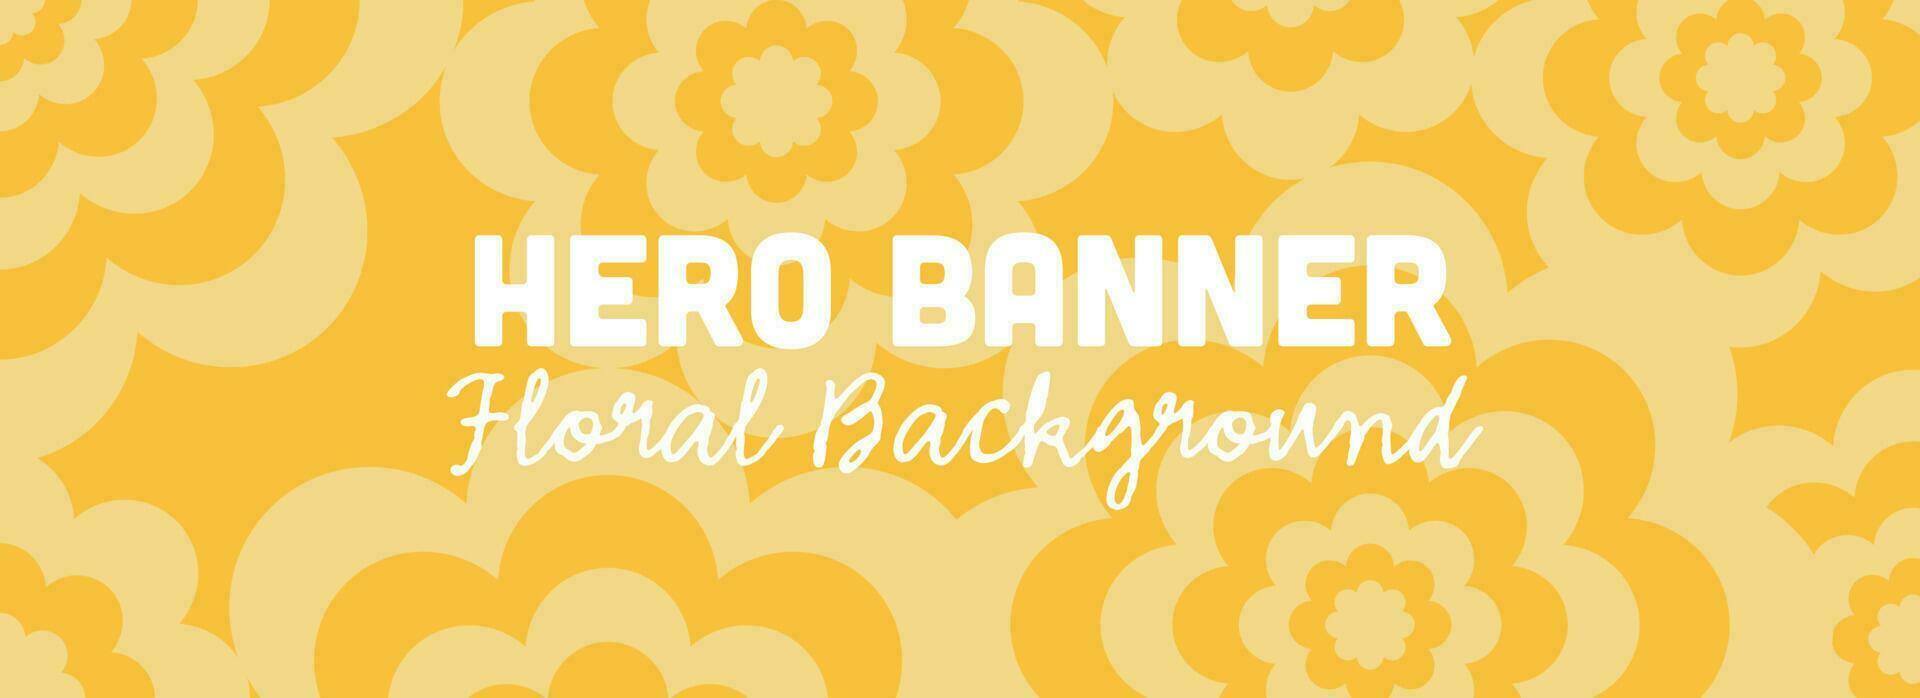 Yellow Floral Banner With Copy Space, Hero Image Template. Flowers Pattern Image for Websites And Print Design, Golden shade vector